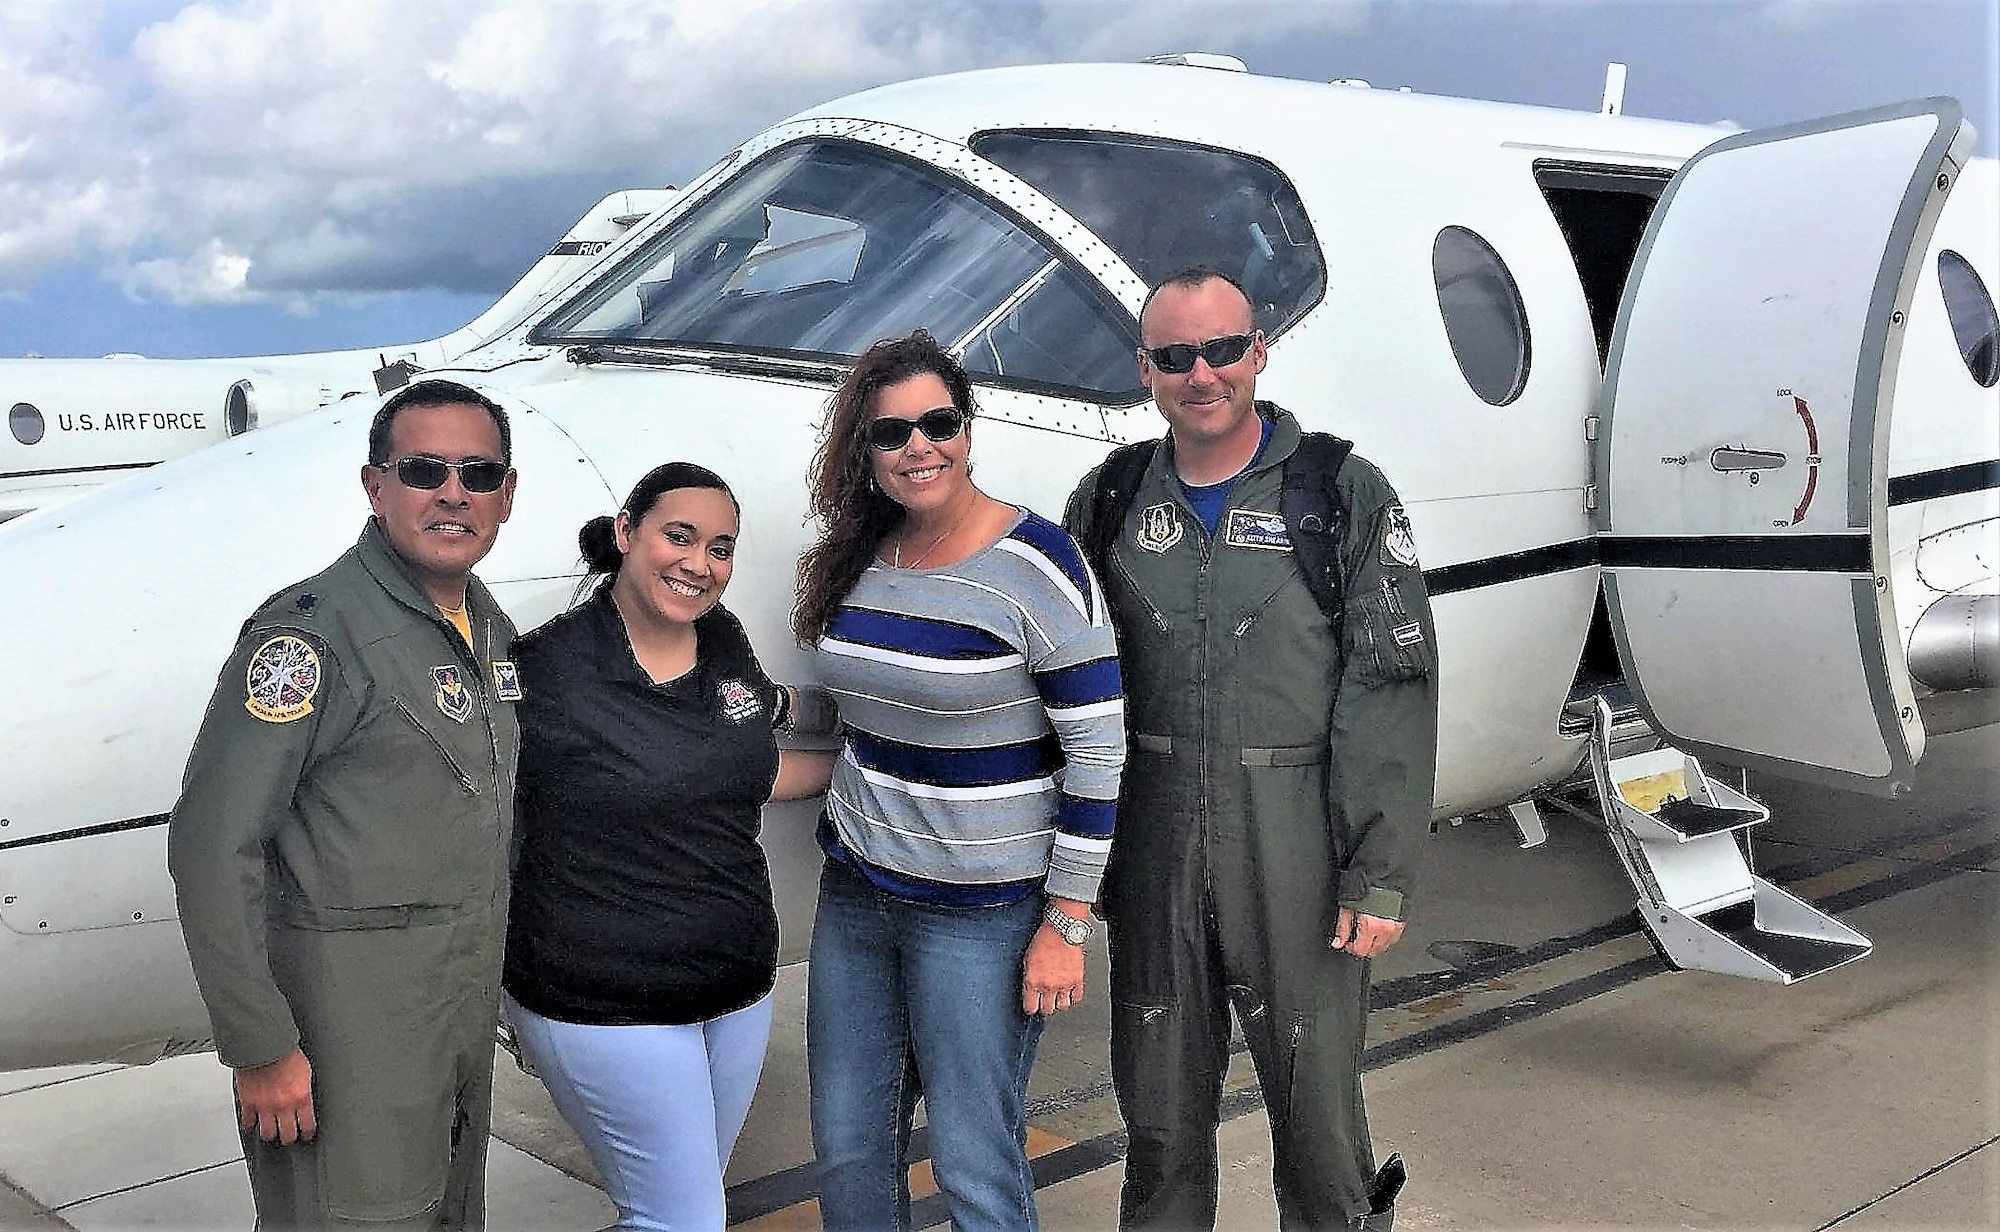 (Left to right) Lt. Col. Arthur Alcantara, 47th Operations Group deputy commander, Laughlin Air Force Base, Del Rio, Texas;  Nanca Rodriguez, 86th Flying Training Squadron honorary commander; 96th Flying Training Squadron honorary commander Emily Cooper; and Lt. Col. Keith Shearin, 96th FTS commander pose for a photo after their honorary commander orientation flight. The honorary commander program helps strengthen relationships between bases and local civic leaders.

The 96th FTS is part of the 340th Flying Training Group and is the Reserve associate to the 47th Flying Training Wing. The squadron supplements the wing’s four active flying squadrons by conducting training in the T-6 Texan II, T-1A Jayhawk, and T-38C Talon portions of Specialized Undergraduate Pilot Training and Introduction to Fighter Fundamentals Course.

The 96th FTS is one of the most highly decorated units with 13 World War II campaign ribbons for service in Tunisia, Sicily, Naples-Foggia, Rome-Arno, Normandy, Northern France, Southern France, North Apennines, Rhineland, Central Europe, Po Valley, Air Offensive, Europe, and Air Combat, European-African Middle Eastern Campaign. The 96th FTS was also awarded three Distinguished Unit Citations and three Air Force Outstanding Unit Awards.